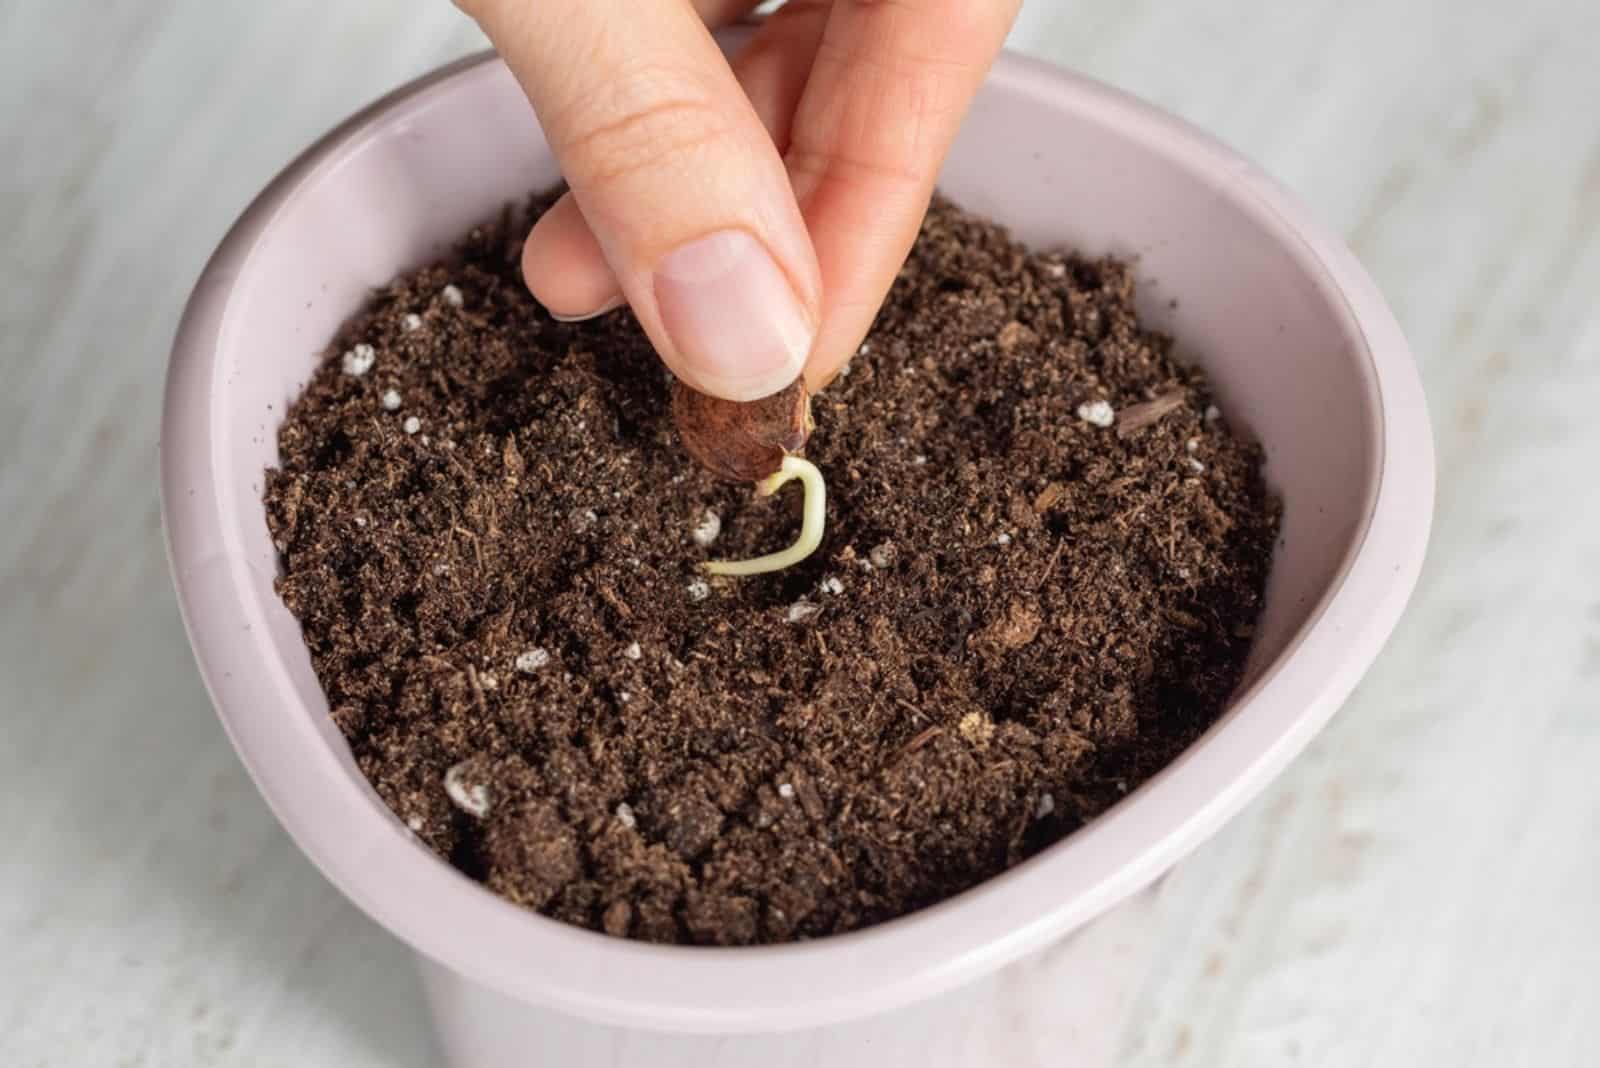 Wisteria seed with a small root is planted in the ground